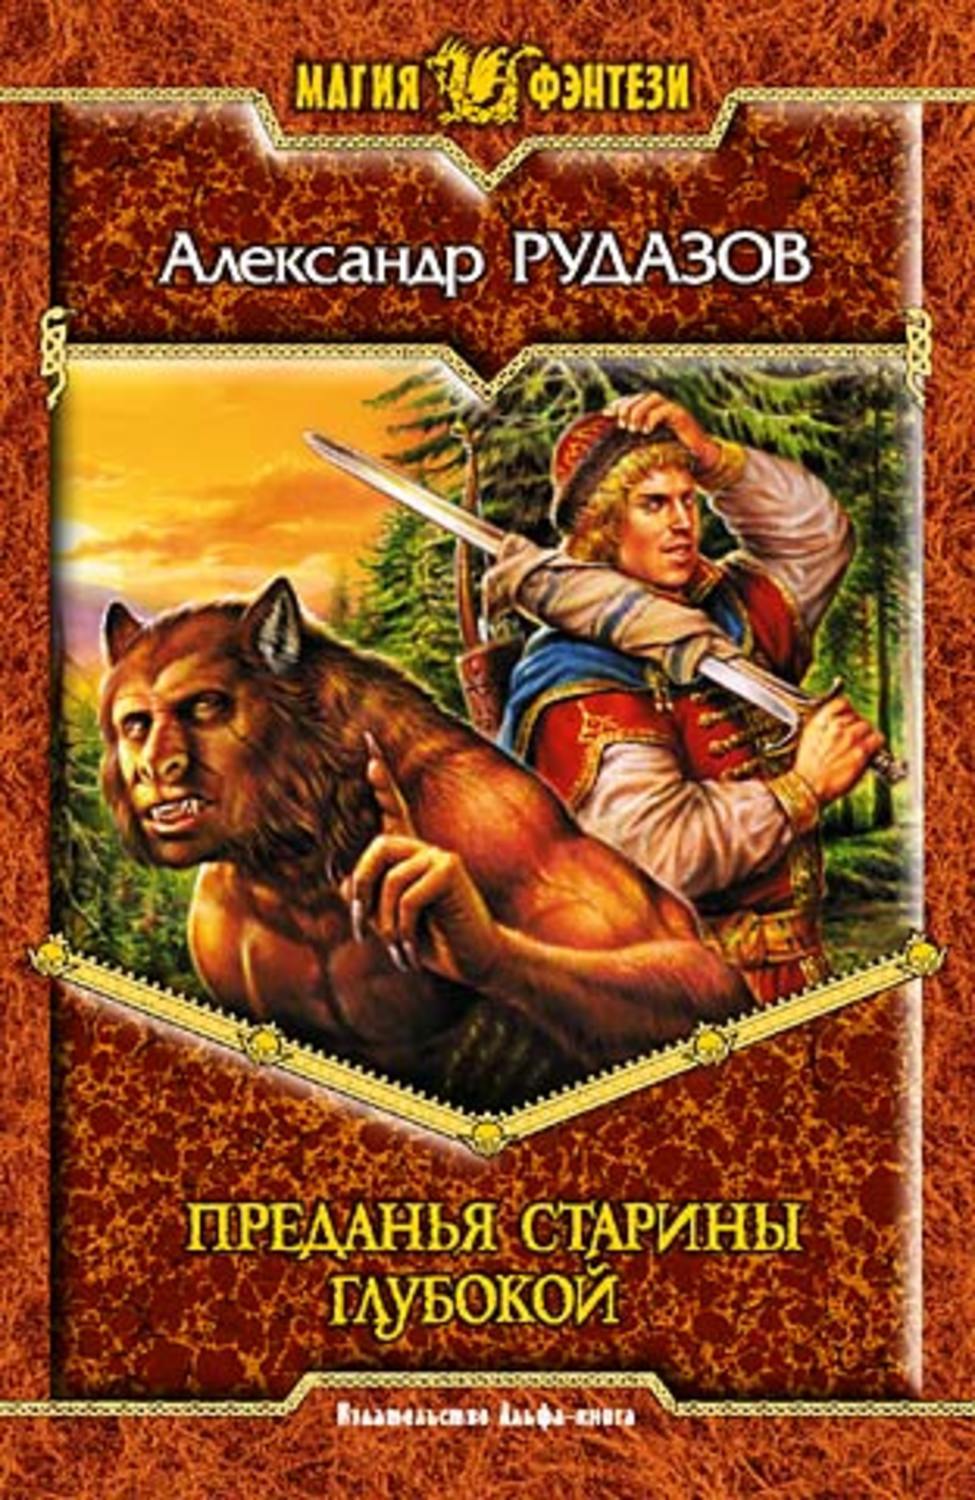 Rudazov Alexander trilogy Tales of antiquity deeply or lukomorye oak green... - My, Books, What to read?, Literature, Fantasy, Story, Overview, Review, Alexander Rudazov, , Tradition, Longpost